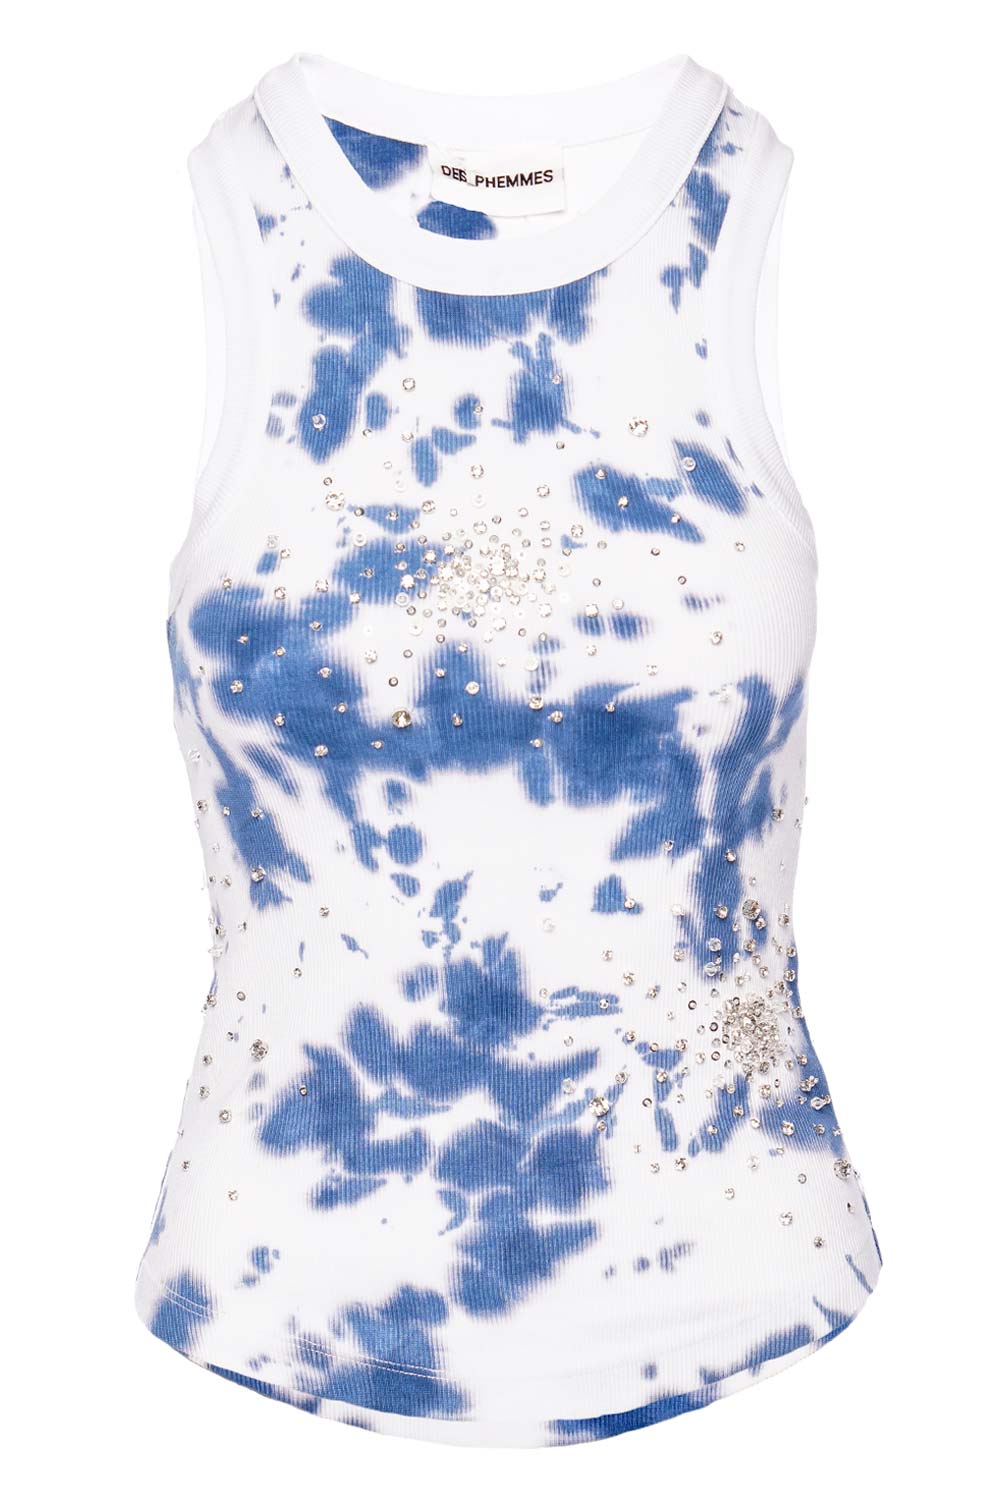 DES_PHEMMES Tie Dye Crystal Embroidered Tank Top